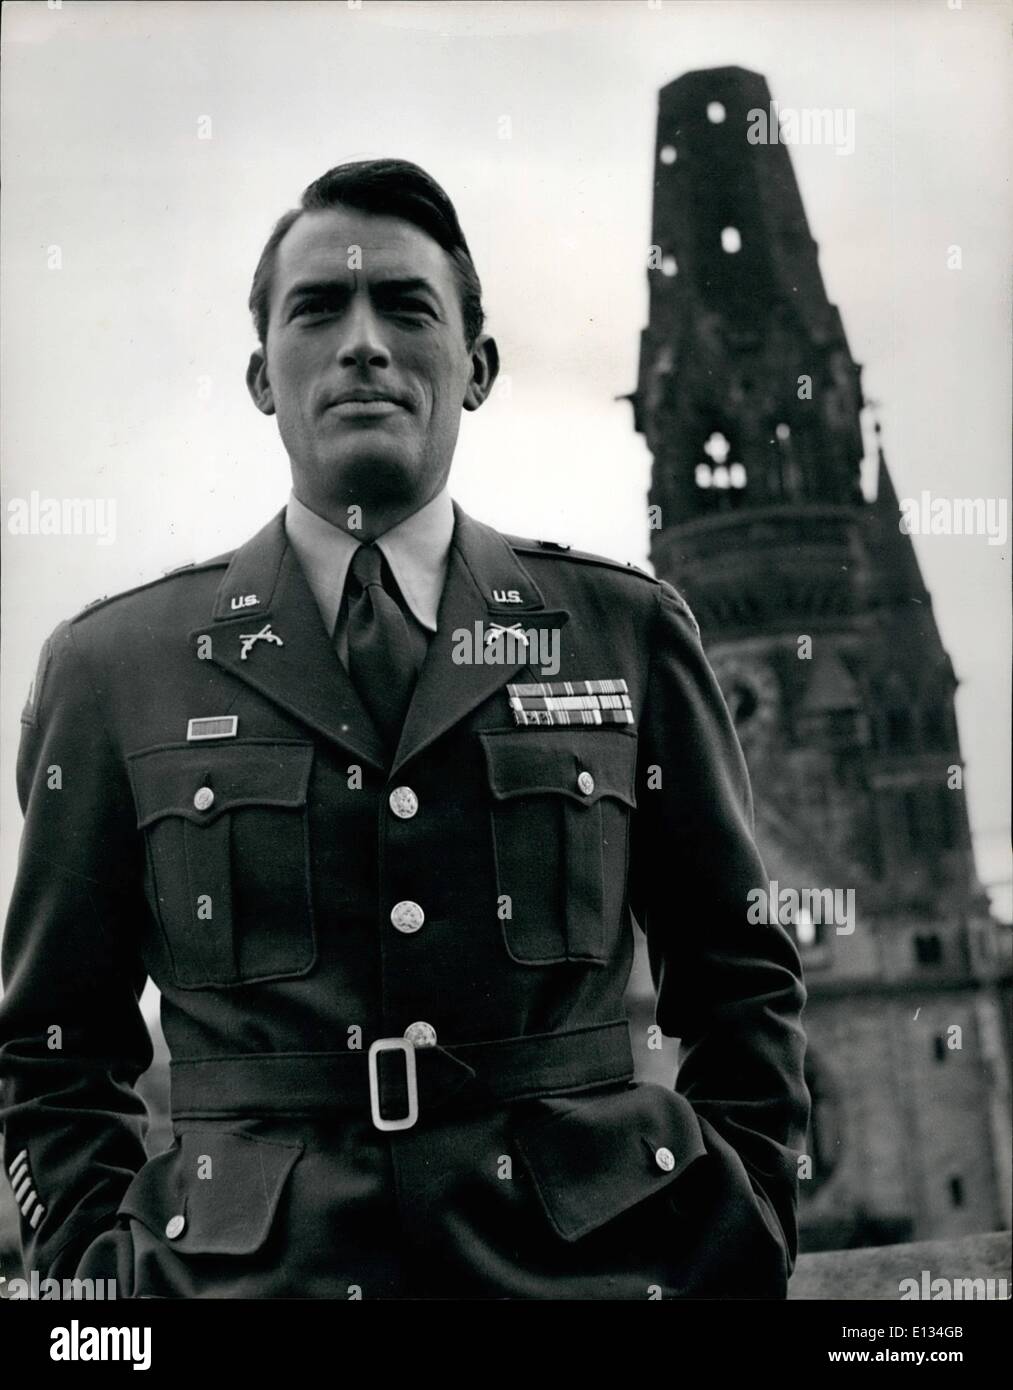 Feb. 28, 2012 - Gregory Peck Stars in new American film made in Berlin.: All exterior shots for the new 20th century fox film, ''Night People'' have been made in the streets of Berlin and the interiors will be shot later in the studios in Hollywood. The story of the film is highly topical based on the struggle between East and West Germany and is directed by Nunnally Joohnson. A young G.I. (ted Avery), is engaged to a German girl (Marianne Koch). Returning to barracks one night in the Western Zone a stranger asks him for a light and as the G.I Stock Photo